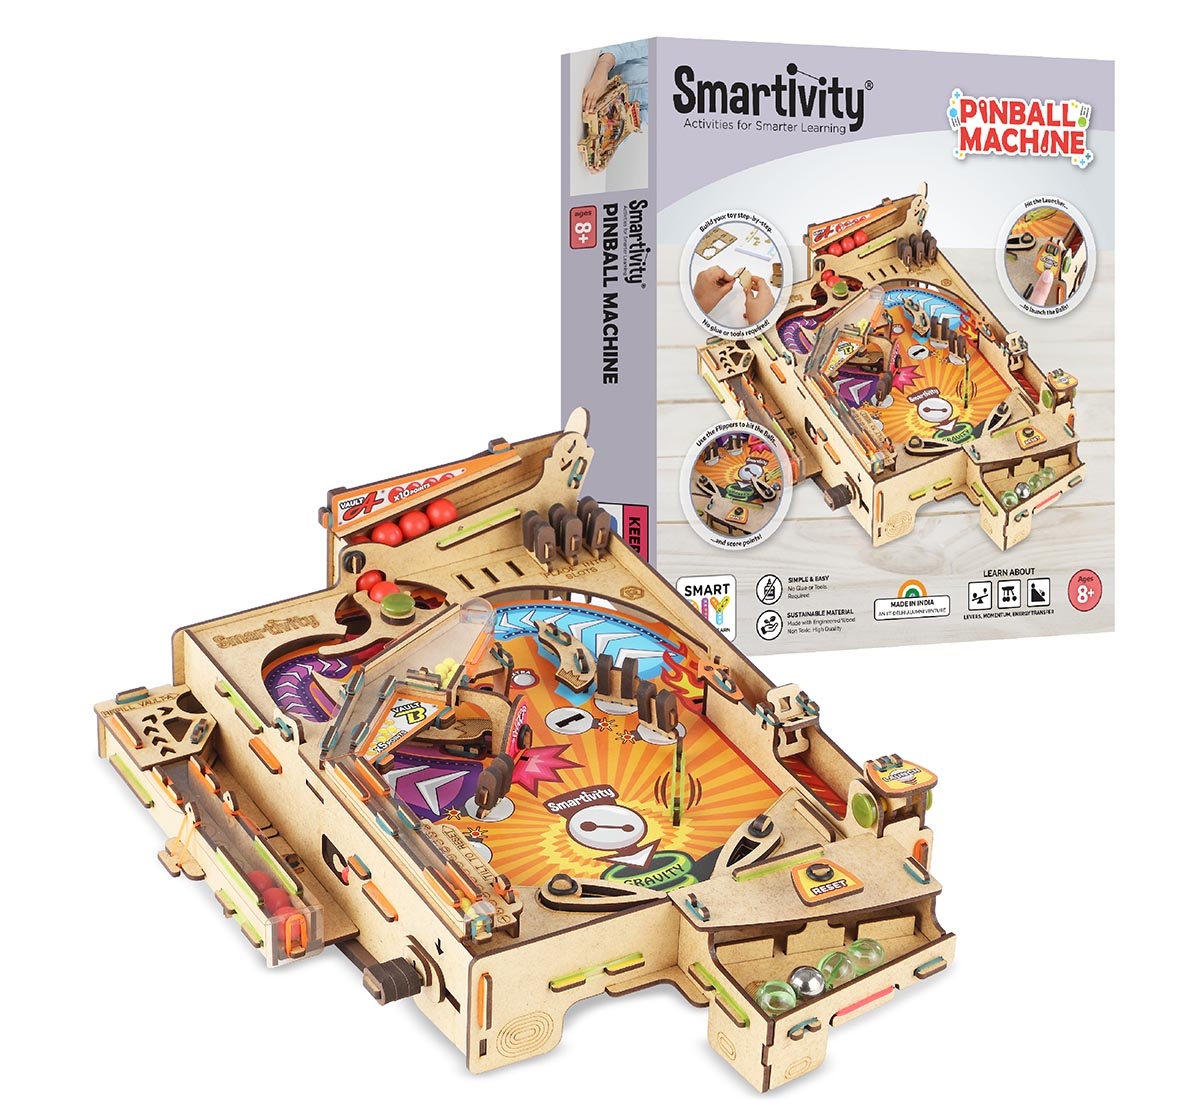 Smartivity | Smartivity Pinball STEM Educational DIY Building Activity Toy Kit, Easy Instructions, Experiment, Play, Learn Science Project With Scoring System for Kids age 7Y+ 0